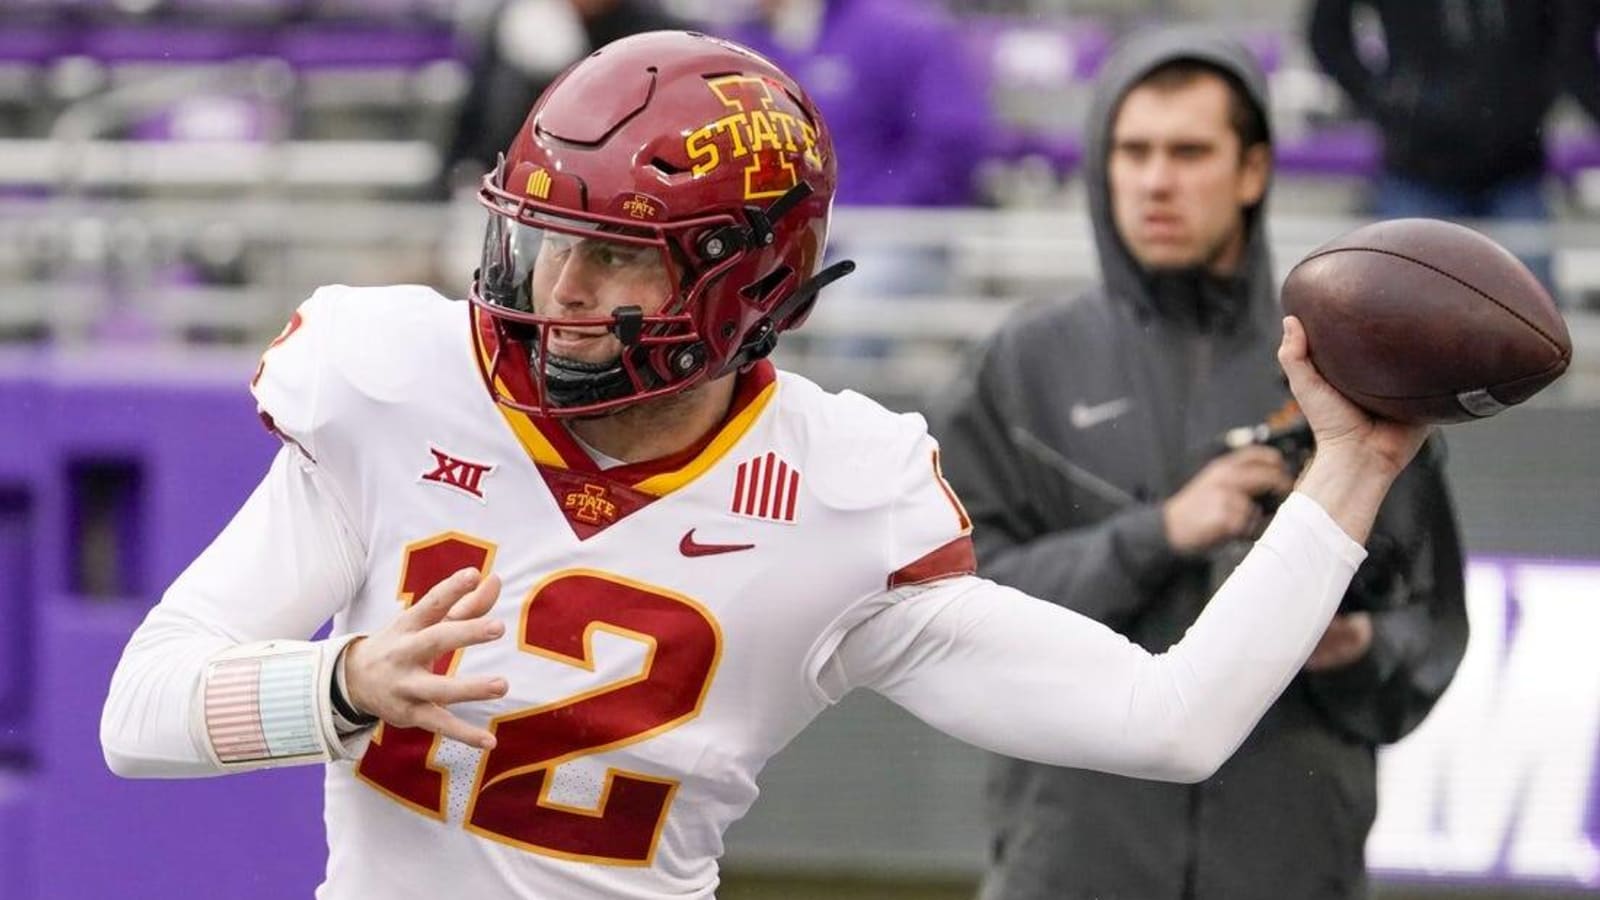 Iowa, Iowa State players to pay fine in gambling case